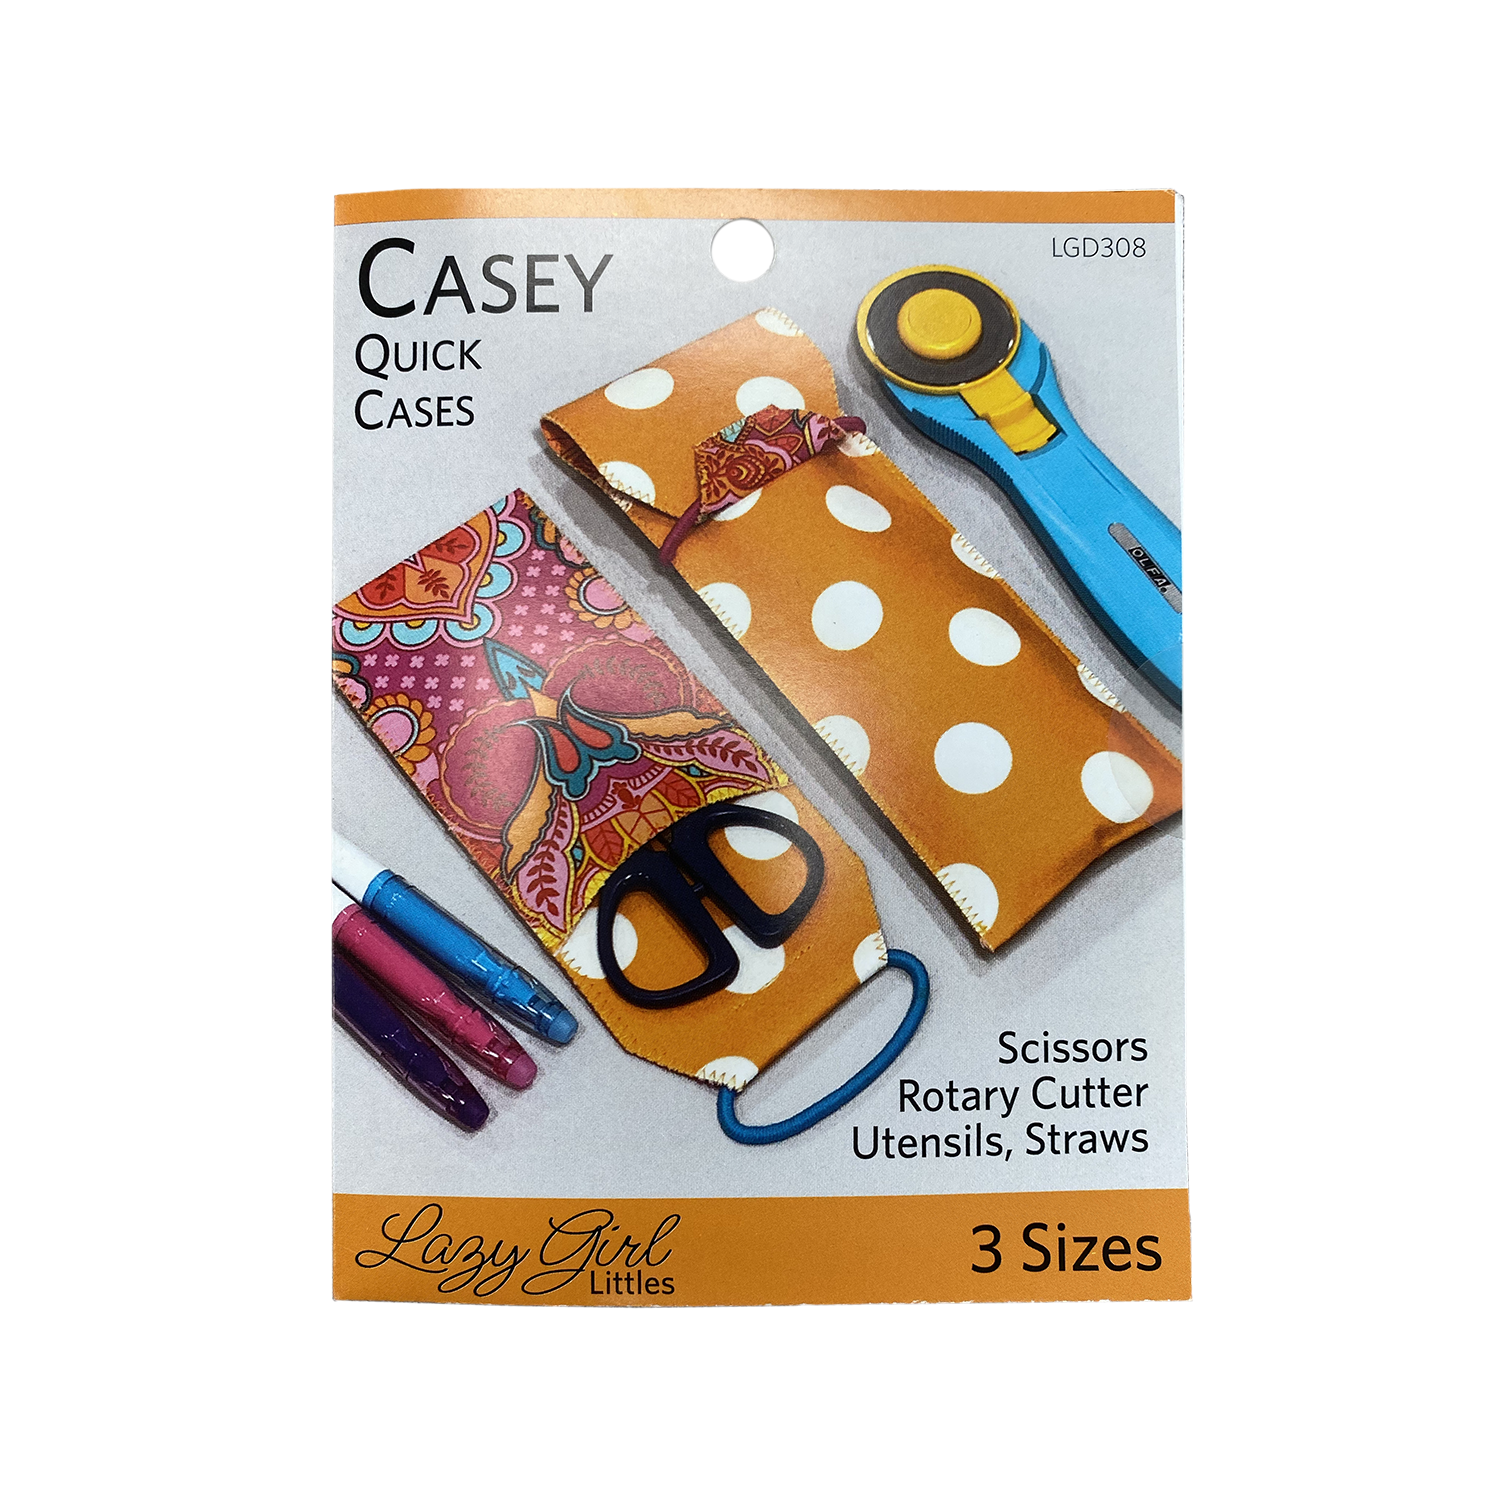 Casey Quick Cases by Lazy Girl Littles